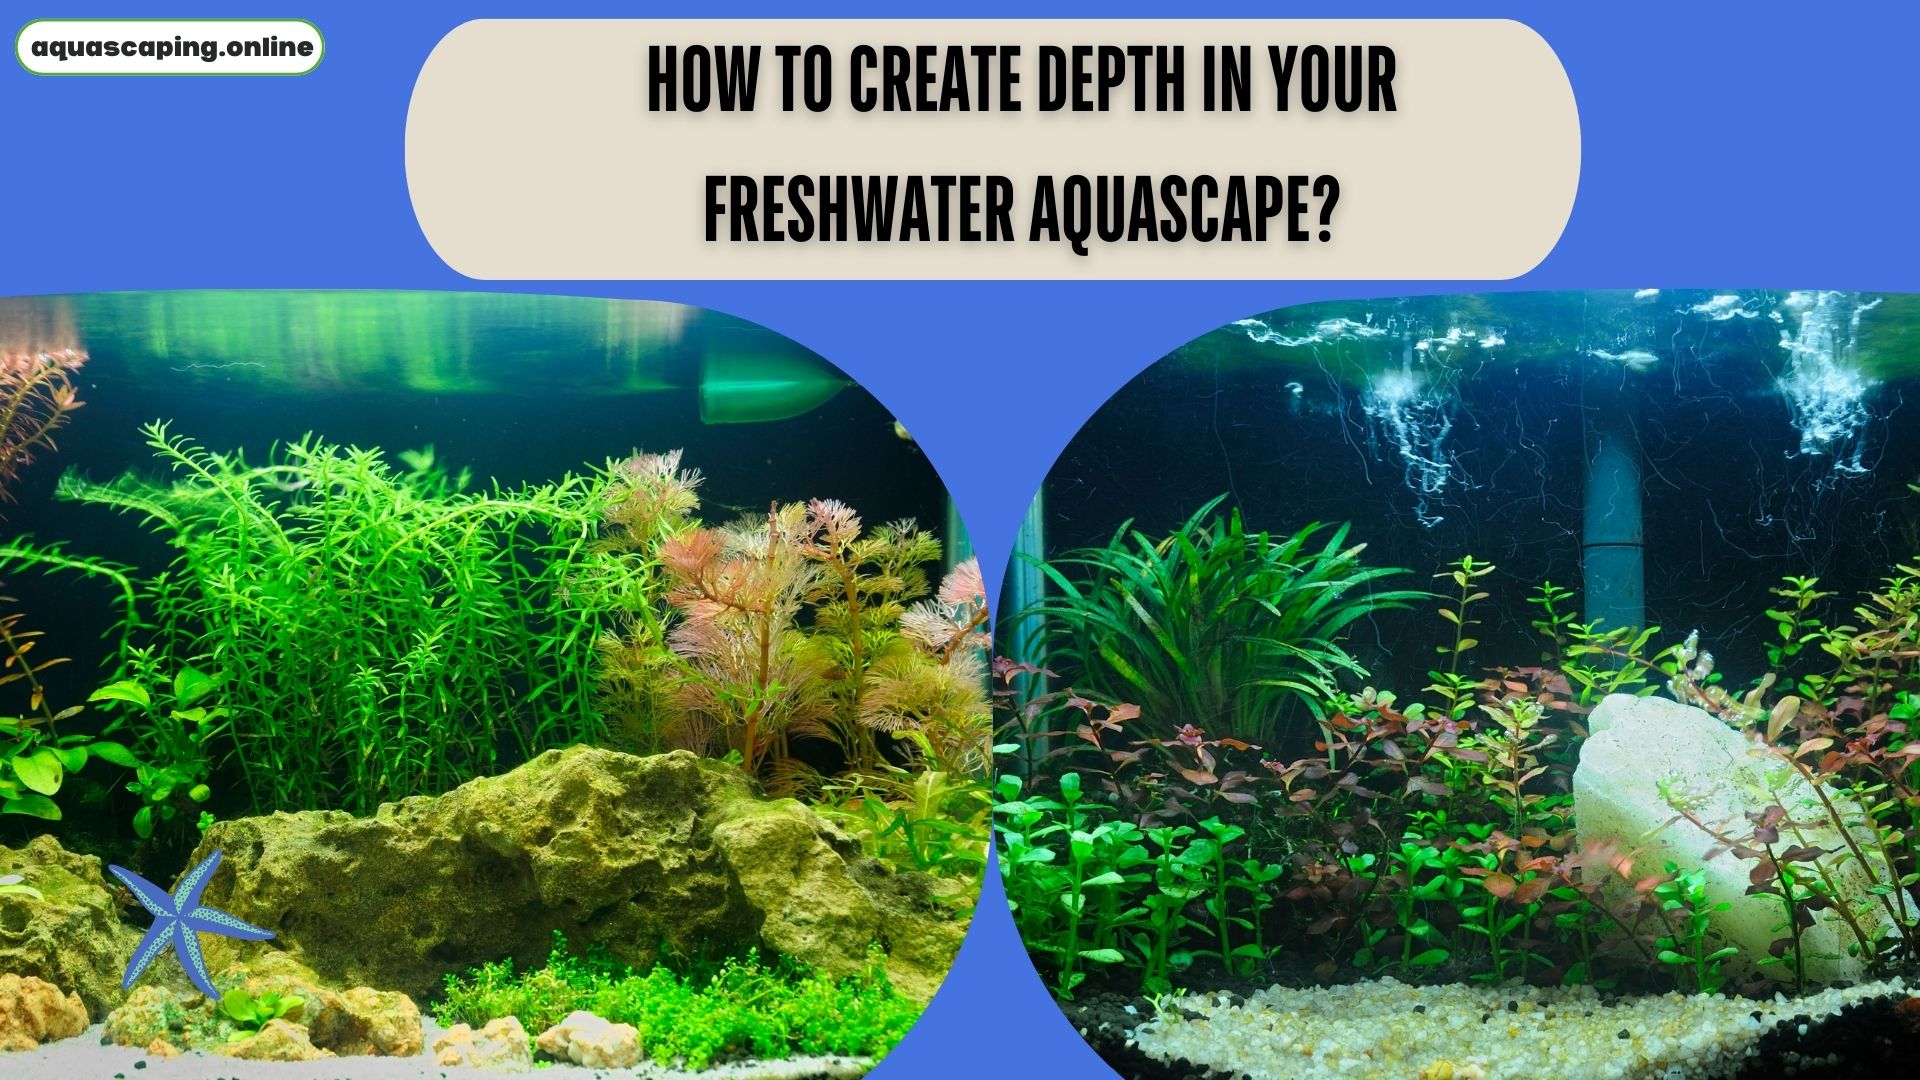 Create depth in your freshwater aquascape